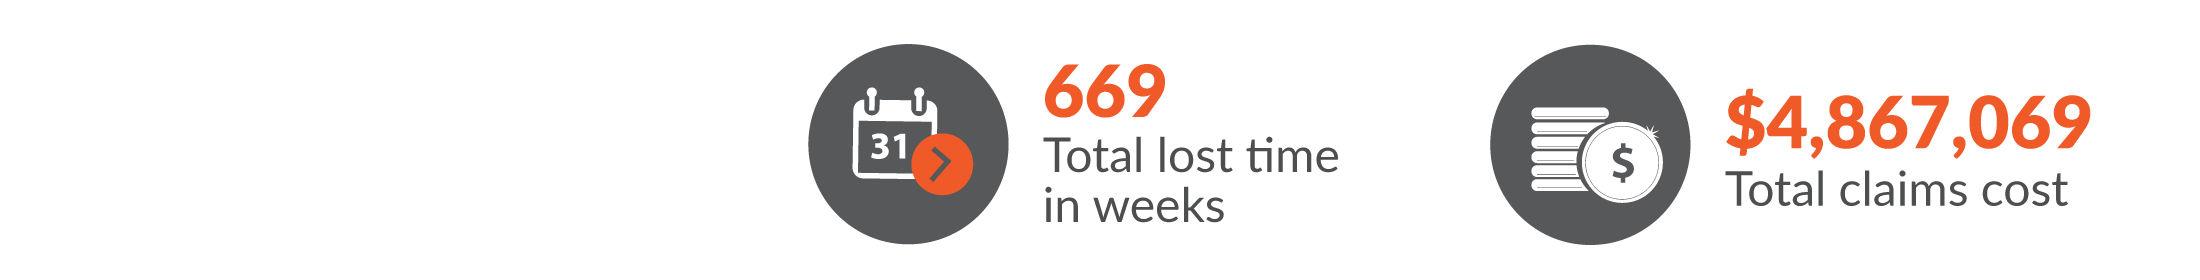 This infographic shows the total workers compensation claims resulted in 669 total lost time in weeks and $4,867,069 was paid in benefits.